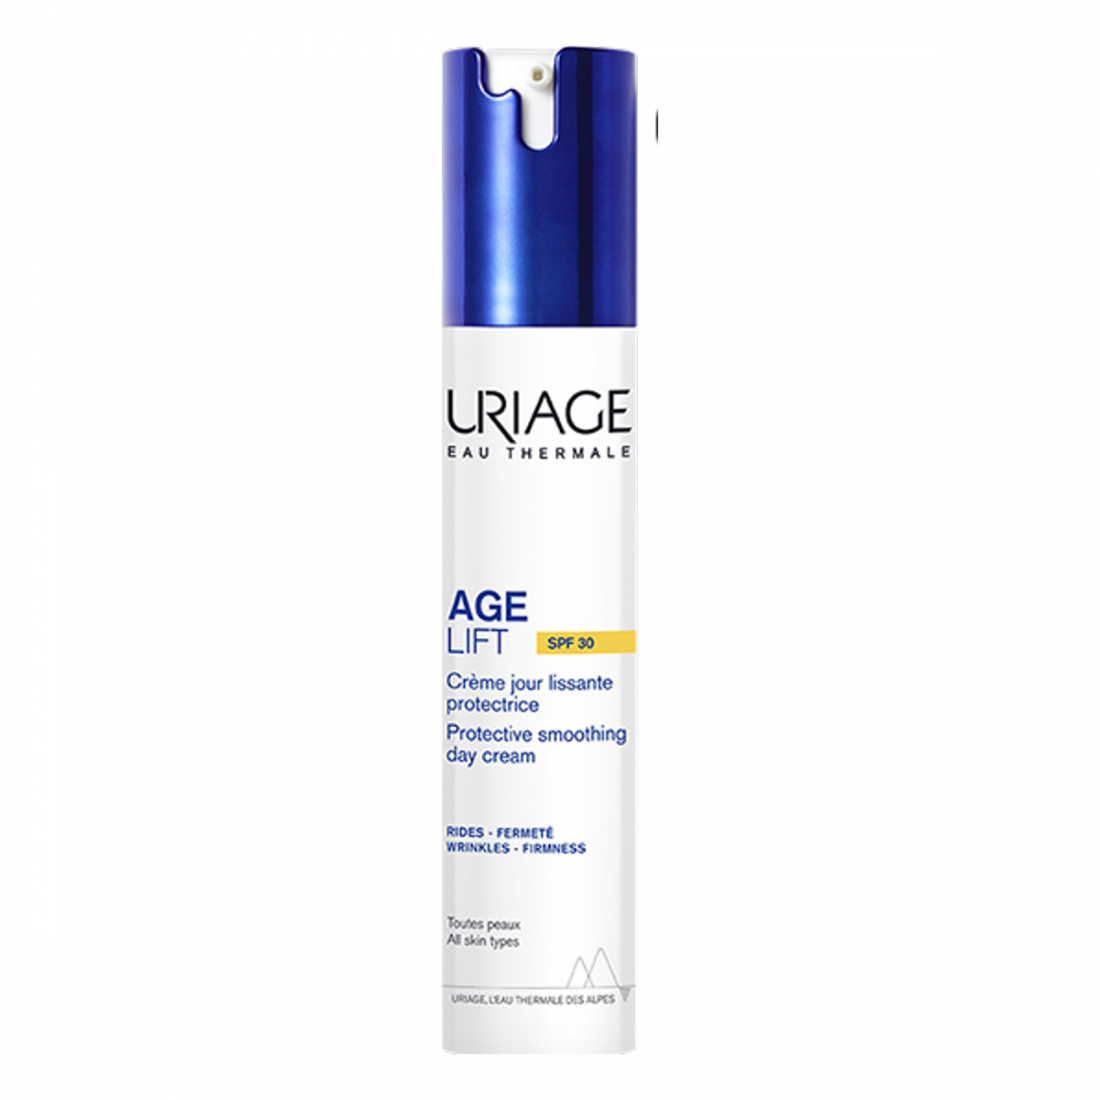 'Age Lift Protective Smoothing SPF30' Anti-Aging Tagescreme - 40 ml